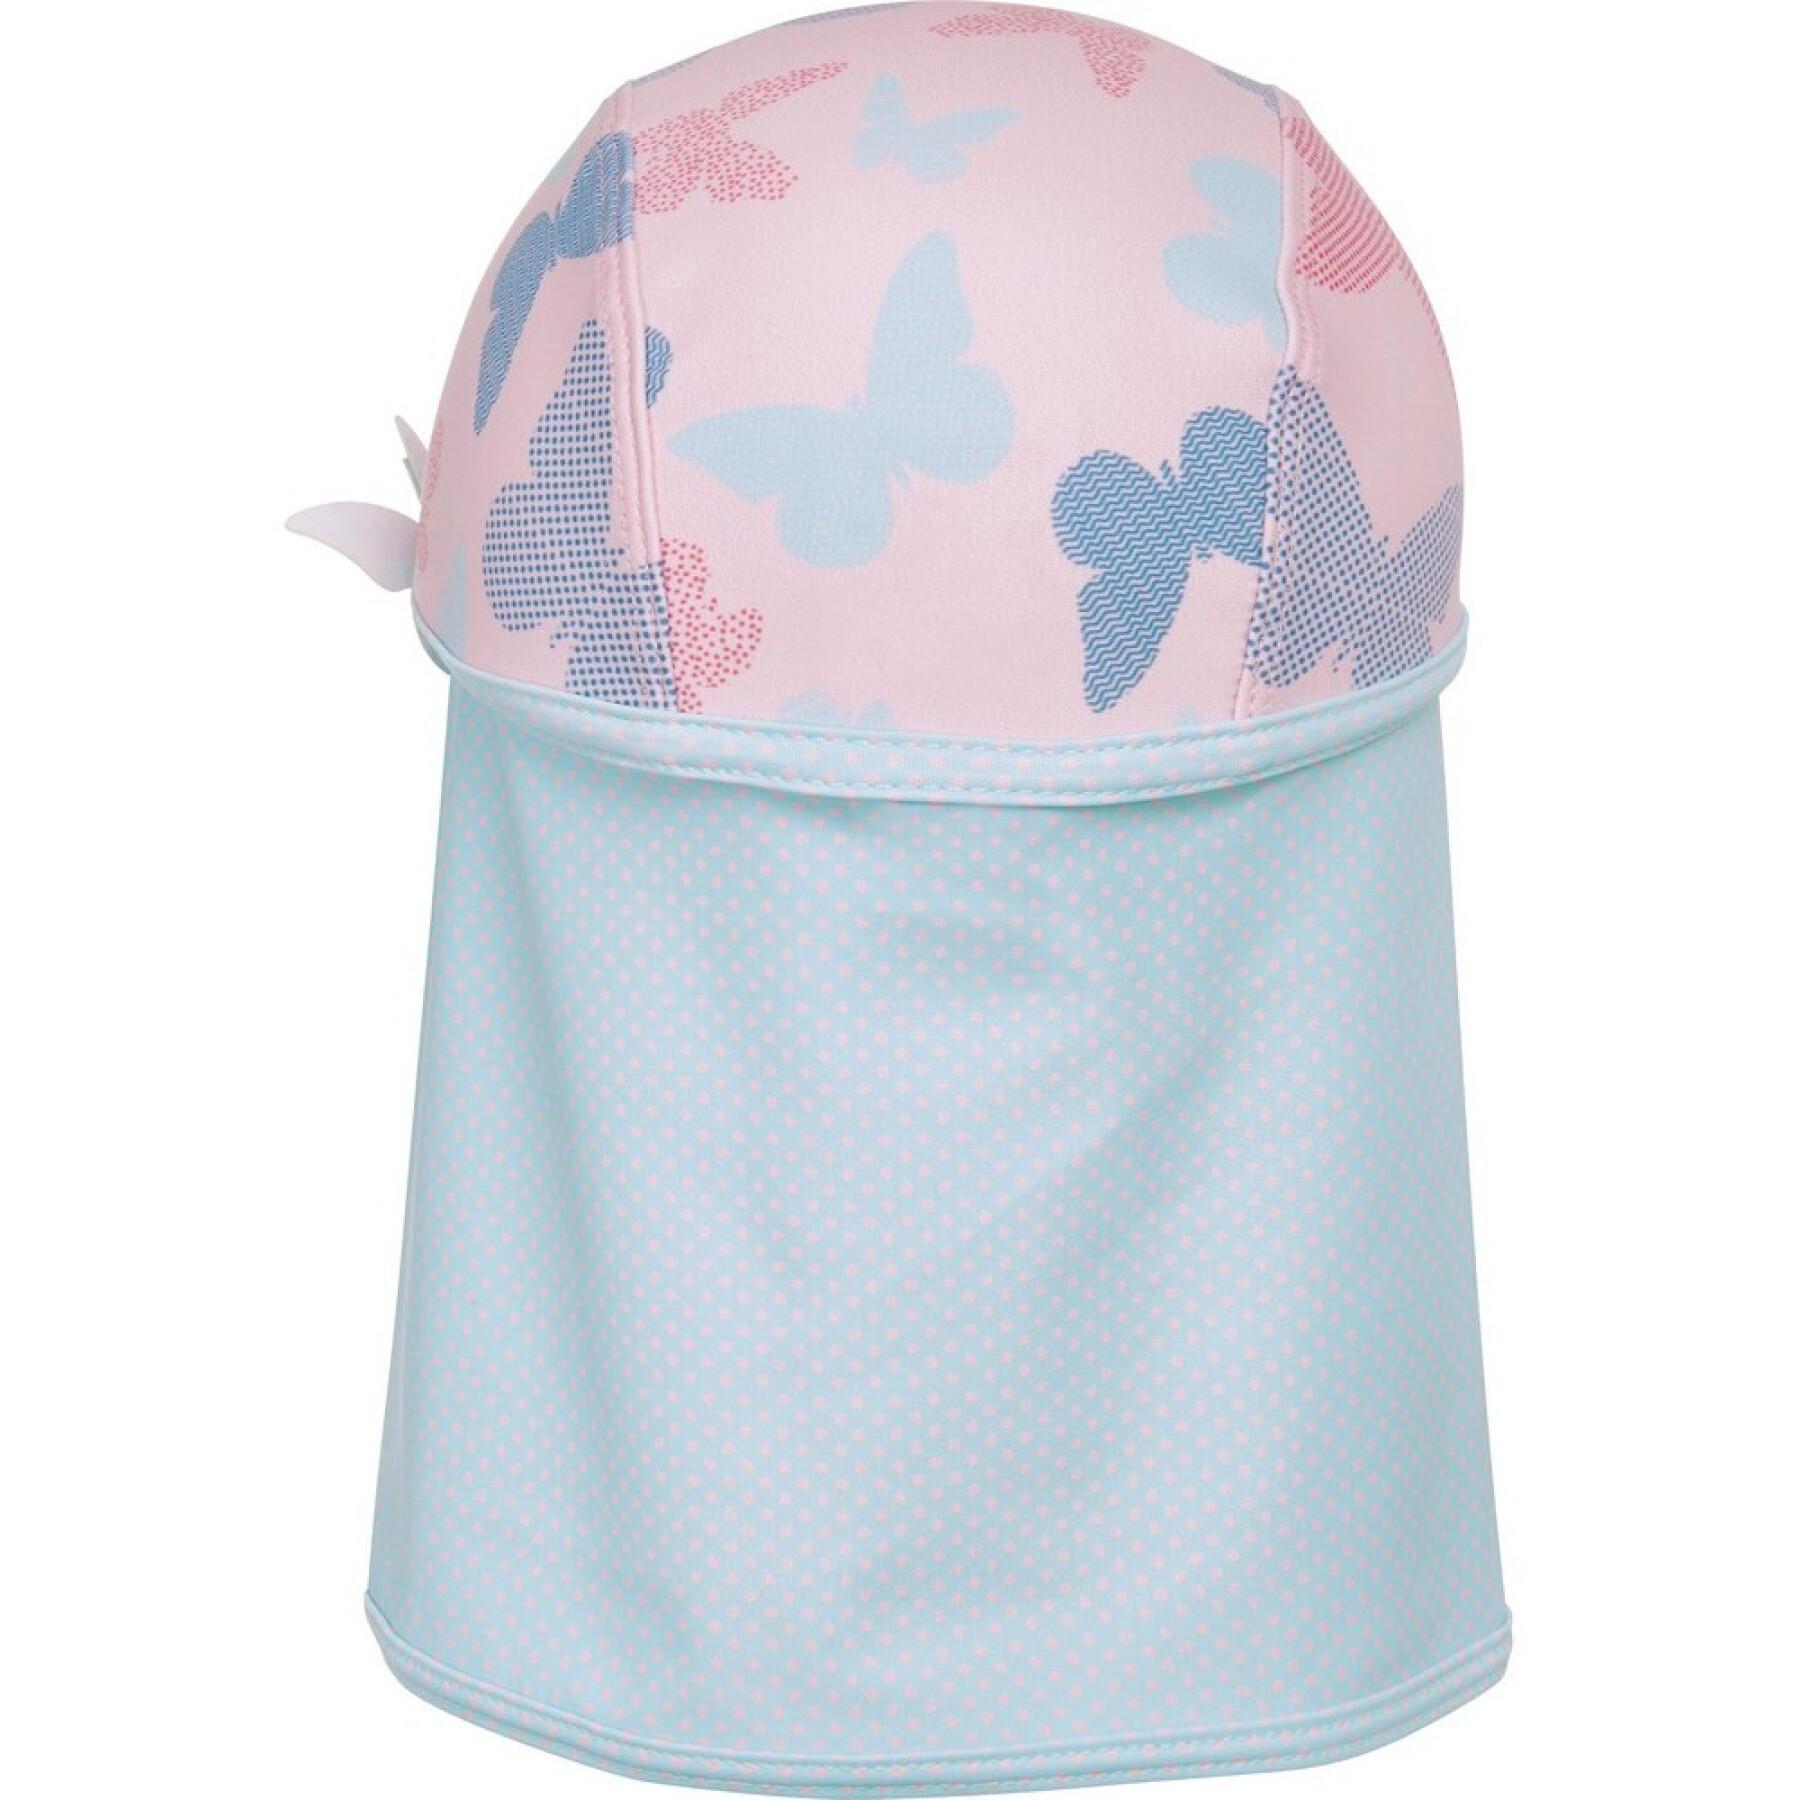 Girl's cap with uv protection Playshoes Butterfly